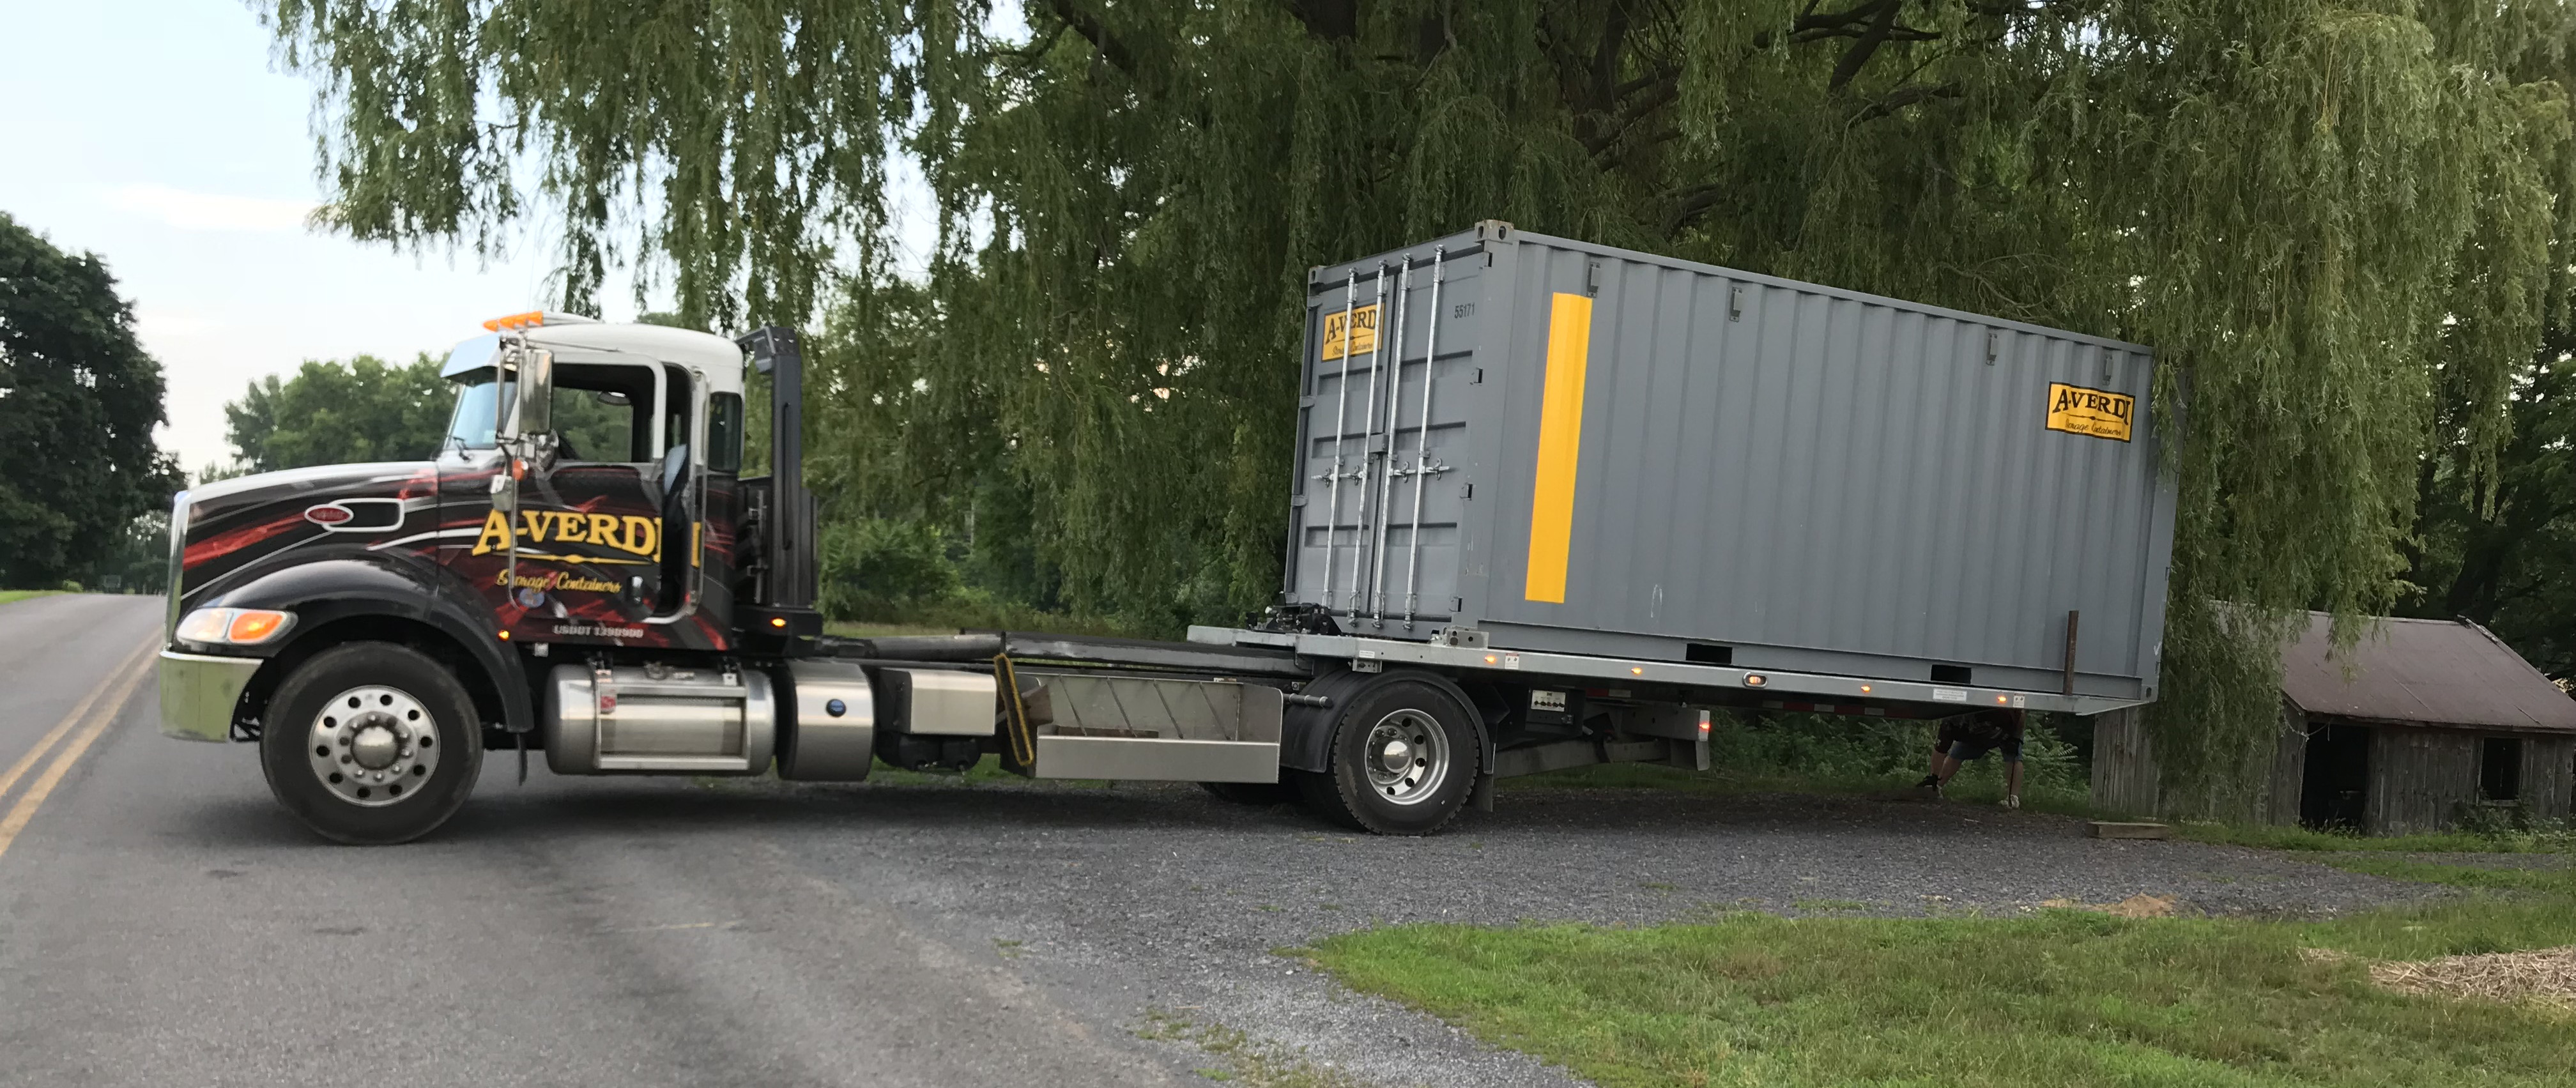 Truck delivering storage container 